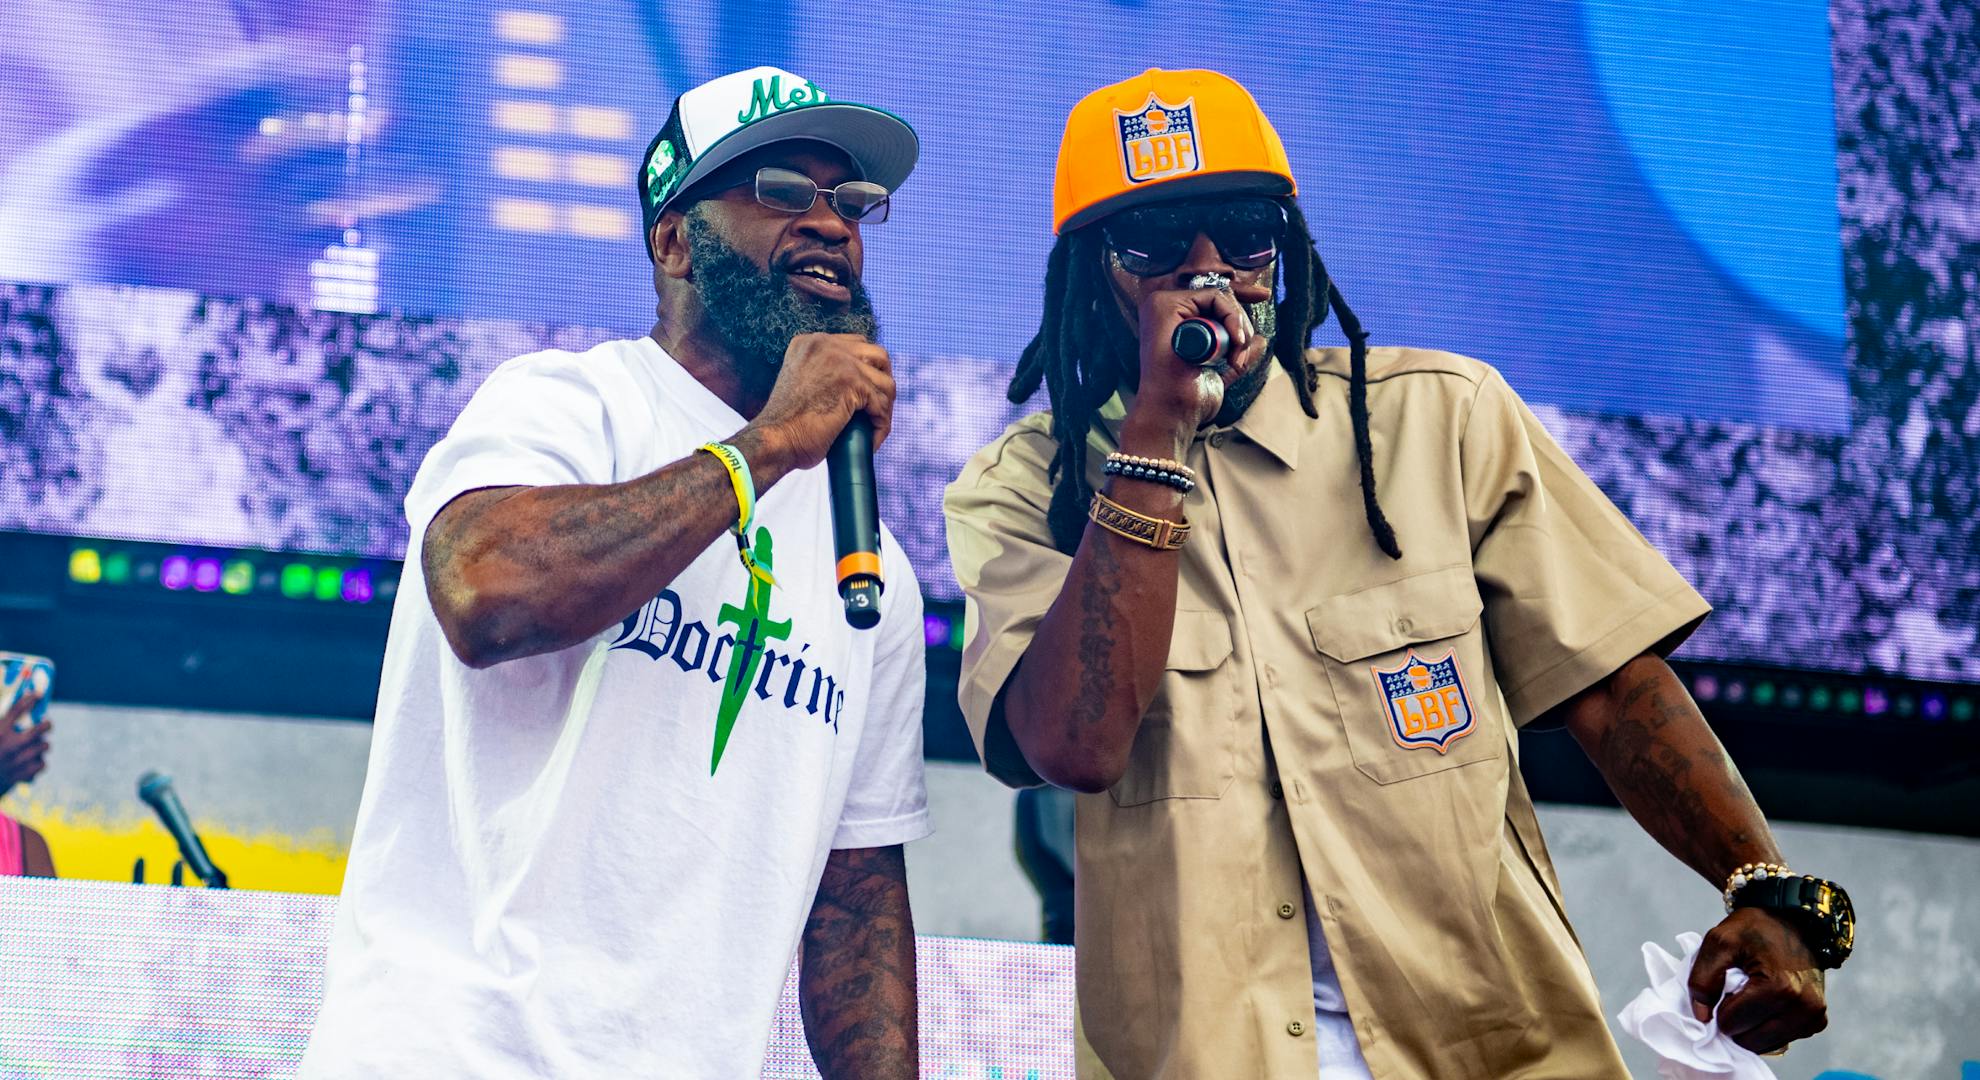 Check Out Photos From the 2023 Rock The Bells Festival